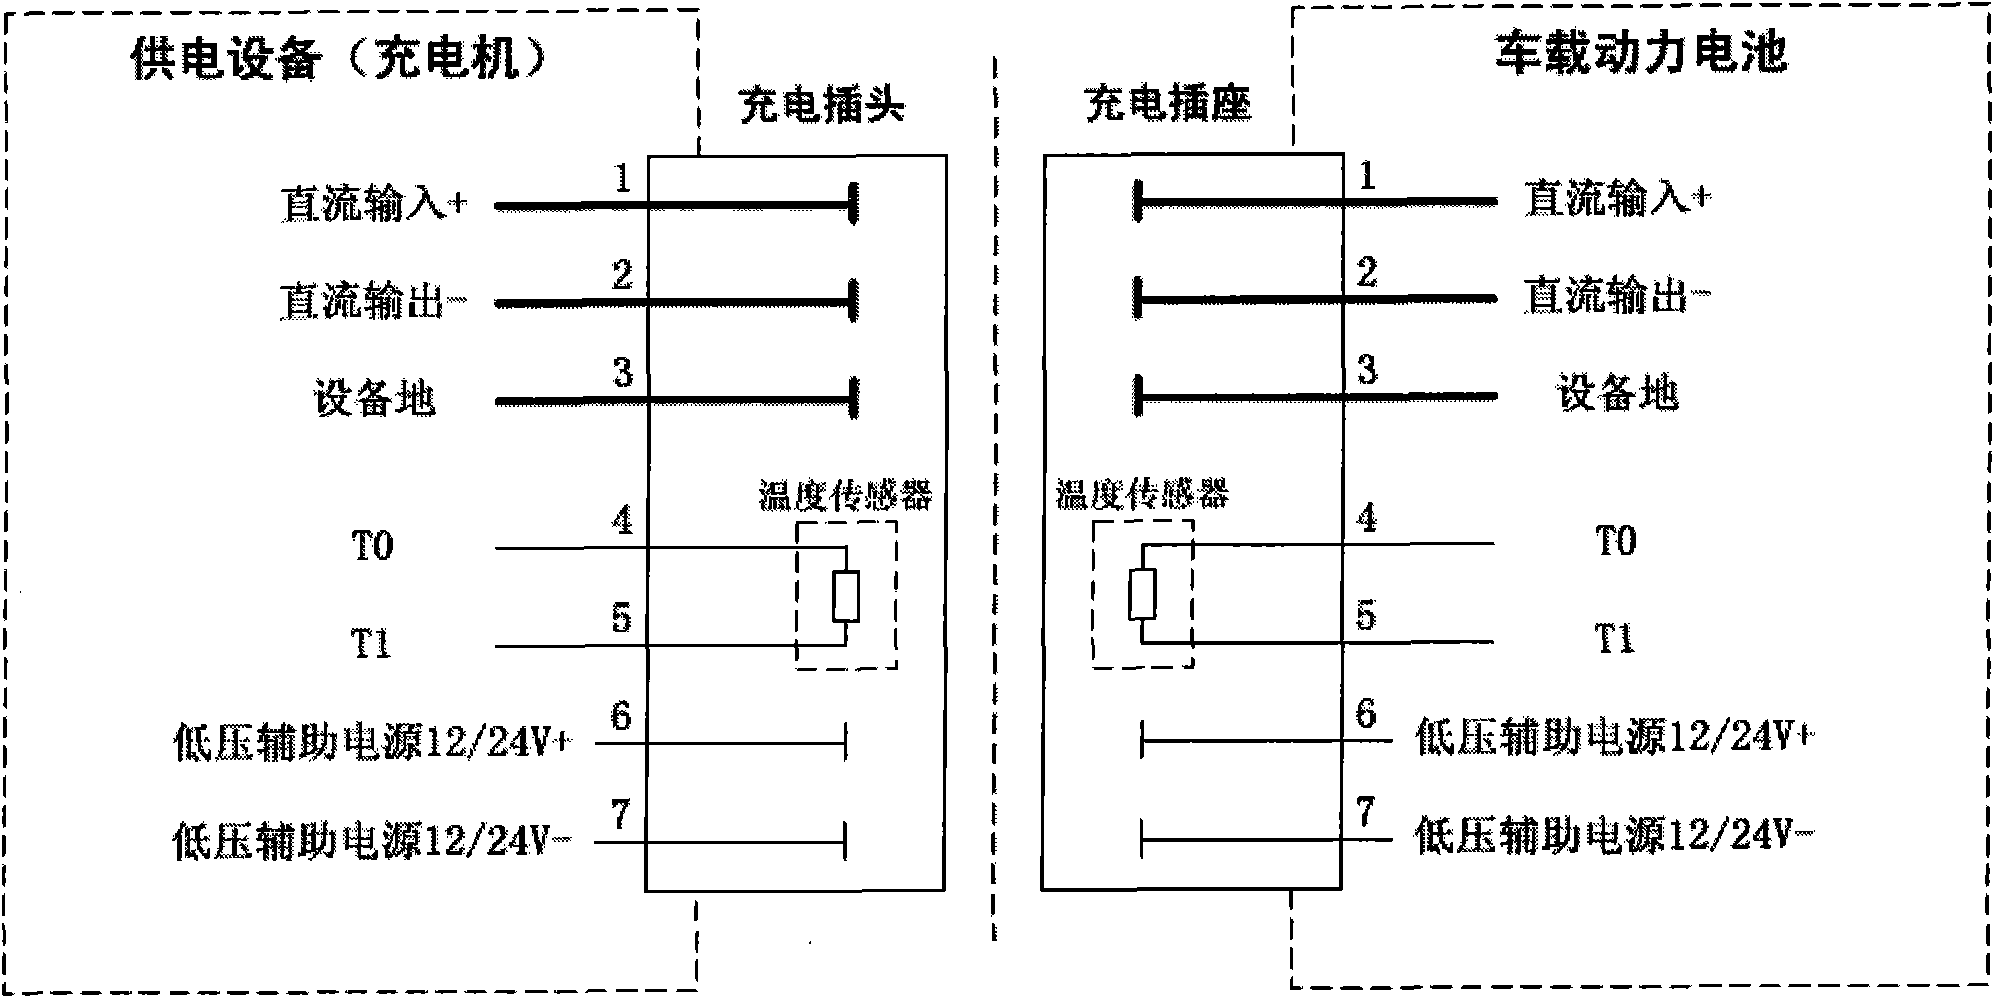 Large-current connector safety monitoring method